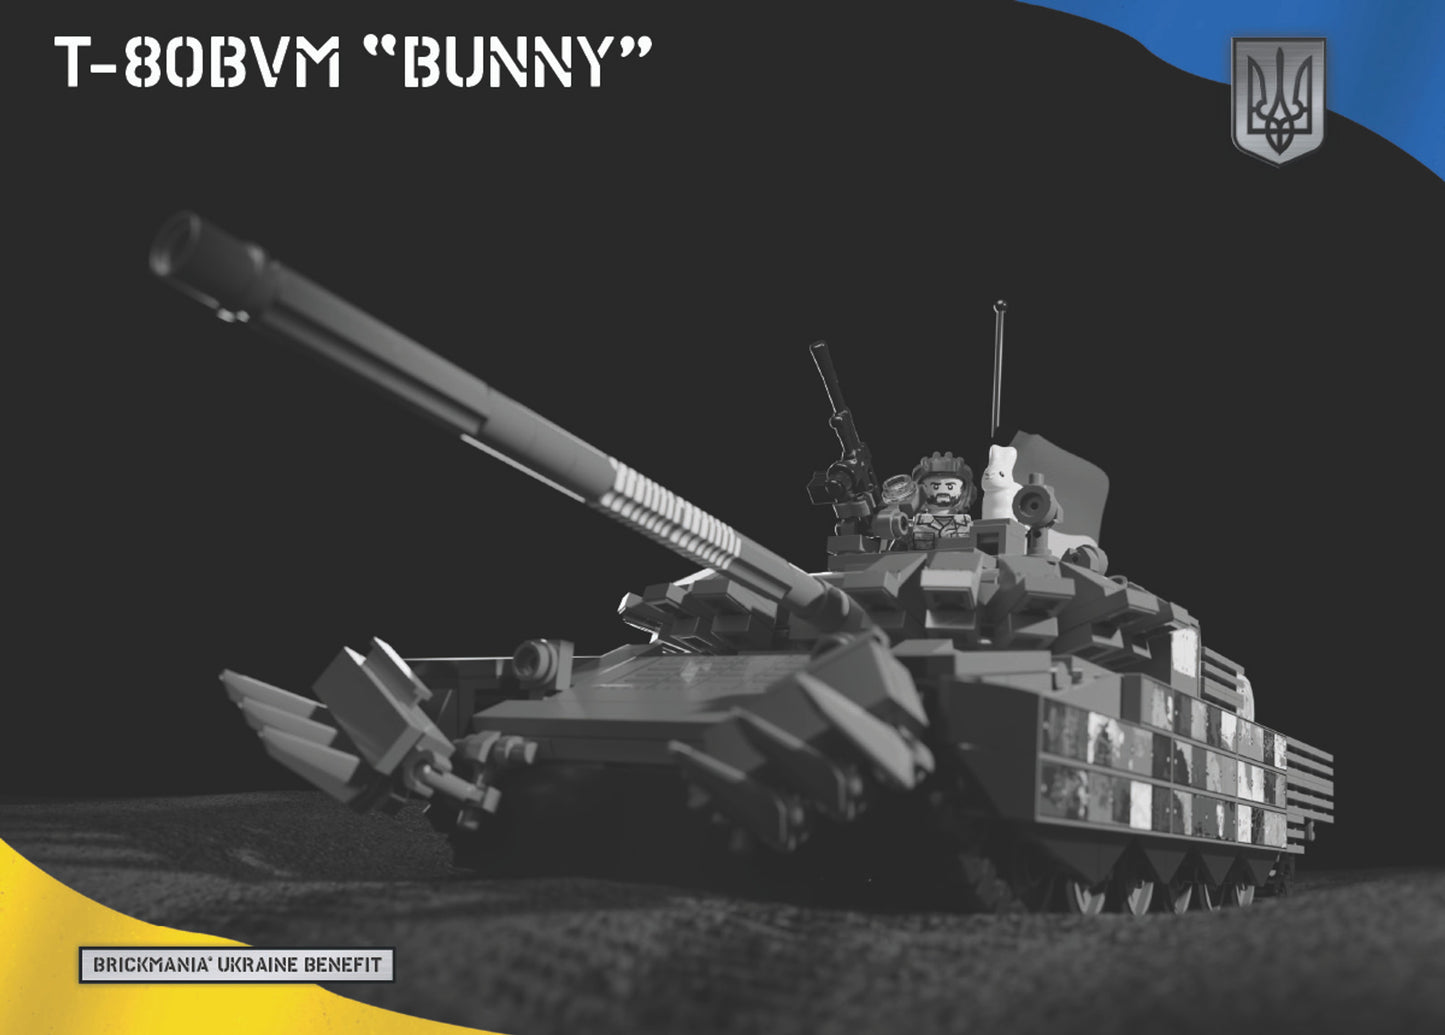 Load image into Gallery viewer, T-80BVM &amp;quot;Bunny&amp;quot; – Captured Russian MBT
